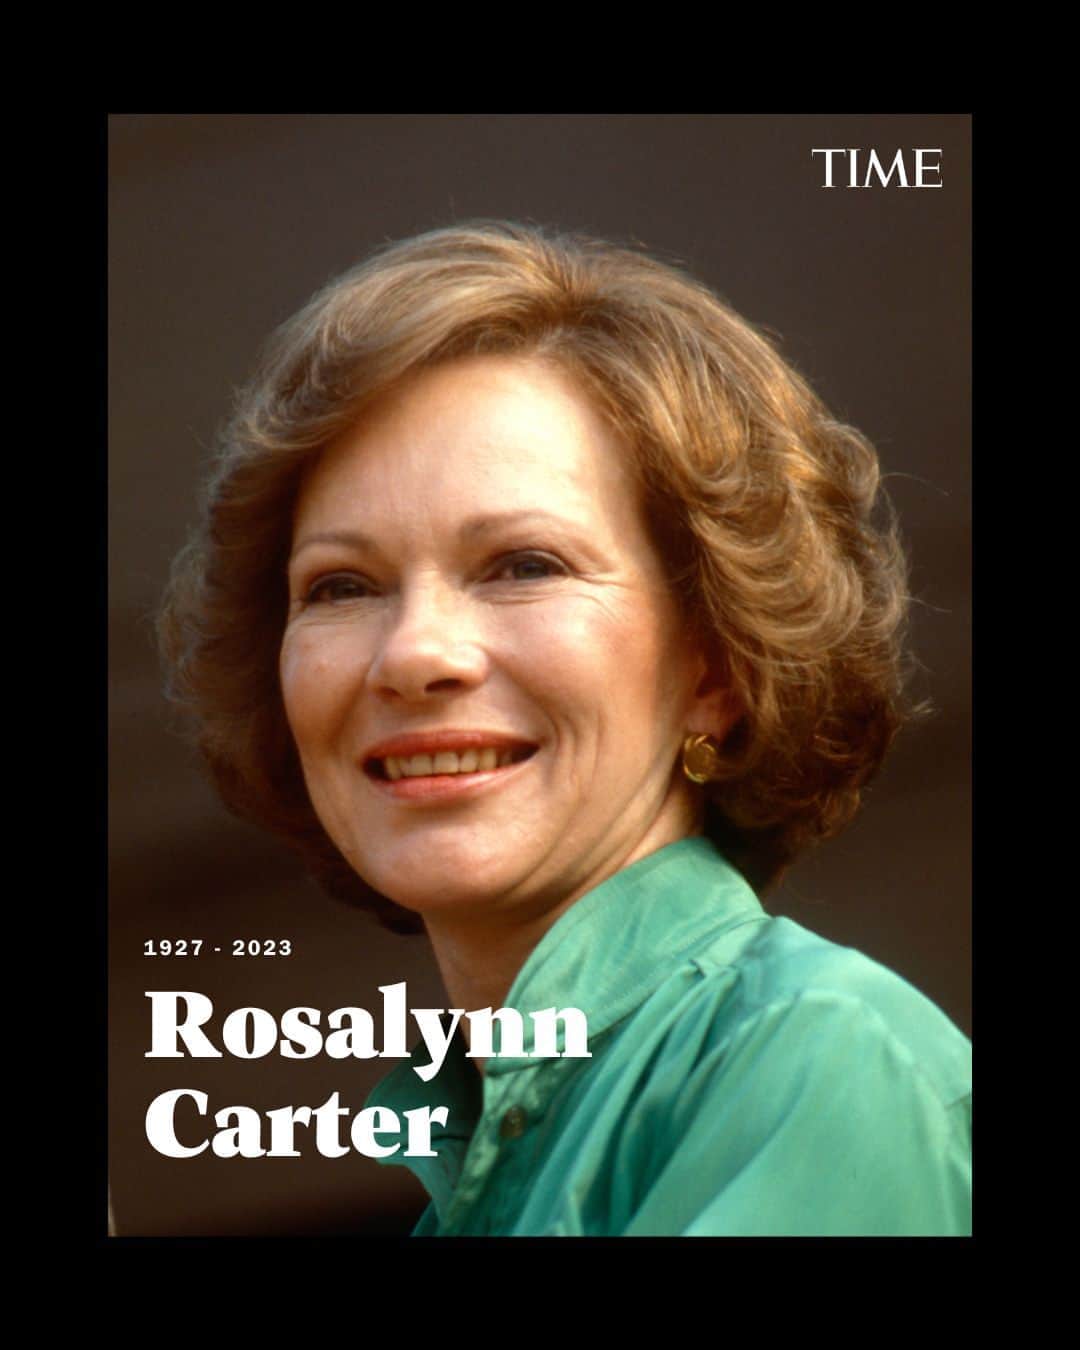 TIME Magazineのインスタグラム：「Rosalynn Carter, the pioneering First Lady who worked tirelessly to raise awareness for those with mental health illness, died on Sunday. She was 96.  “Rosalynn was my equal partner in everything I ever accomplished,” her husband, former President Jimmy Carter, said in a statement confirming the news. “She gave me wise guidance and encouragement when I needed it. As long as Rosalynn was in the world, I always knew somebody loved and supported me.”  Carter displayed a fiery intellect and motivation to help those on the fringes of society long before she moved into the White House after her husband won the 1976 presidential election.   She approached her role as First Lady with the same hands-on spirit—quietly rewriting the rules with her steely determination and steadfast support from her husband, who considered her his closest advisor and “a very equal partner.”  Read more at the link in bio.   Photograph by Diana Walker—Getty Images」